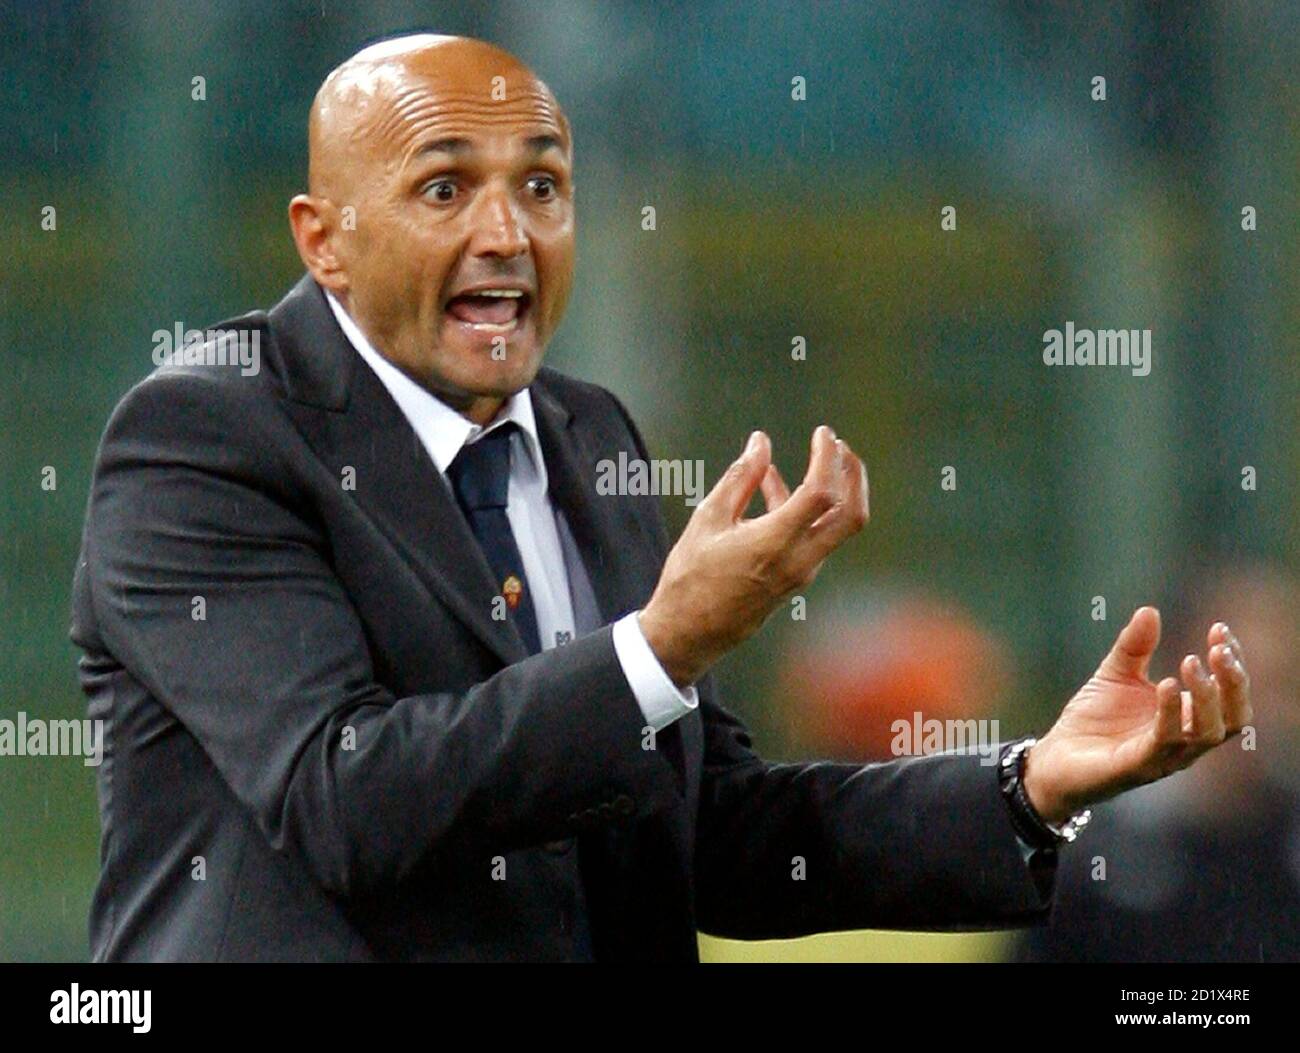 AS Roma's coach Luciano Spalletti gestures during the Italian Serie A soccer derby match against Lazio at the Olympic stadium in Rome October 31, 2007. REUTERS/Giampiero Sposito      (ITALY) Stock Photo